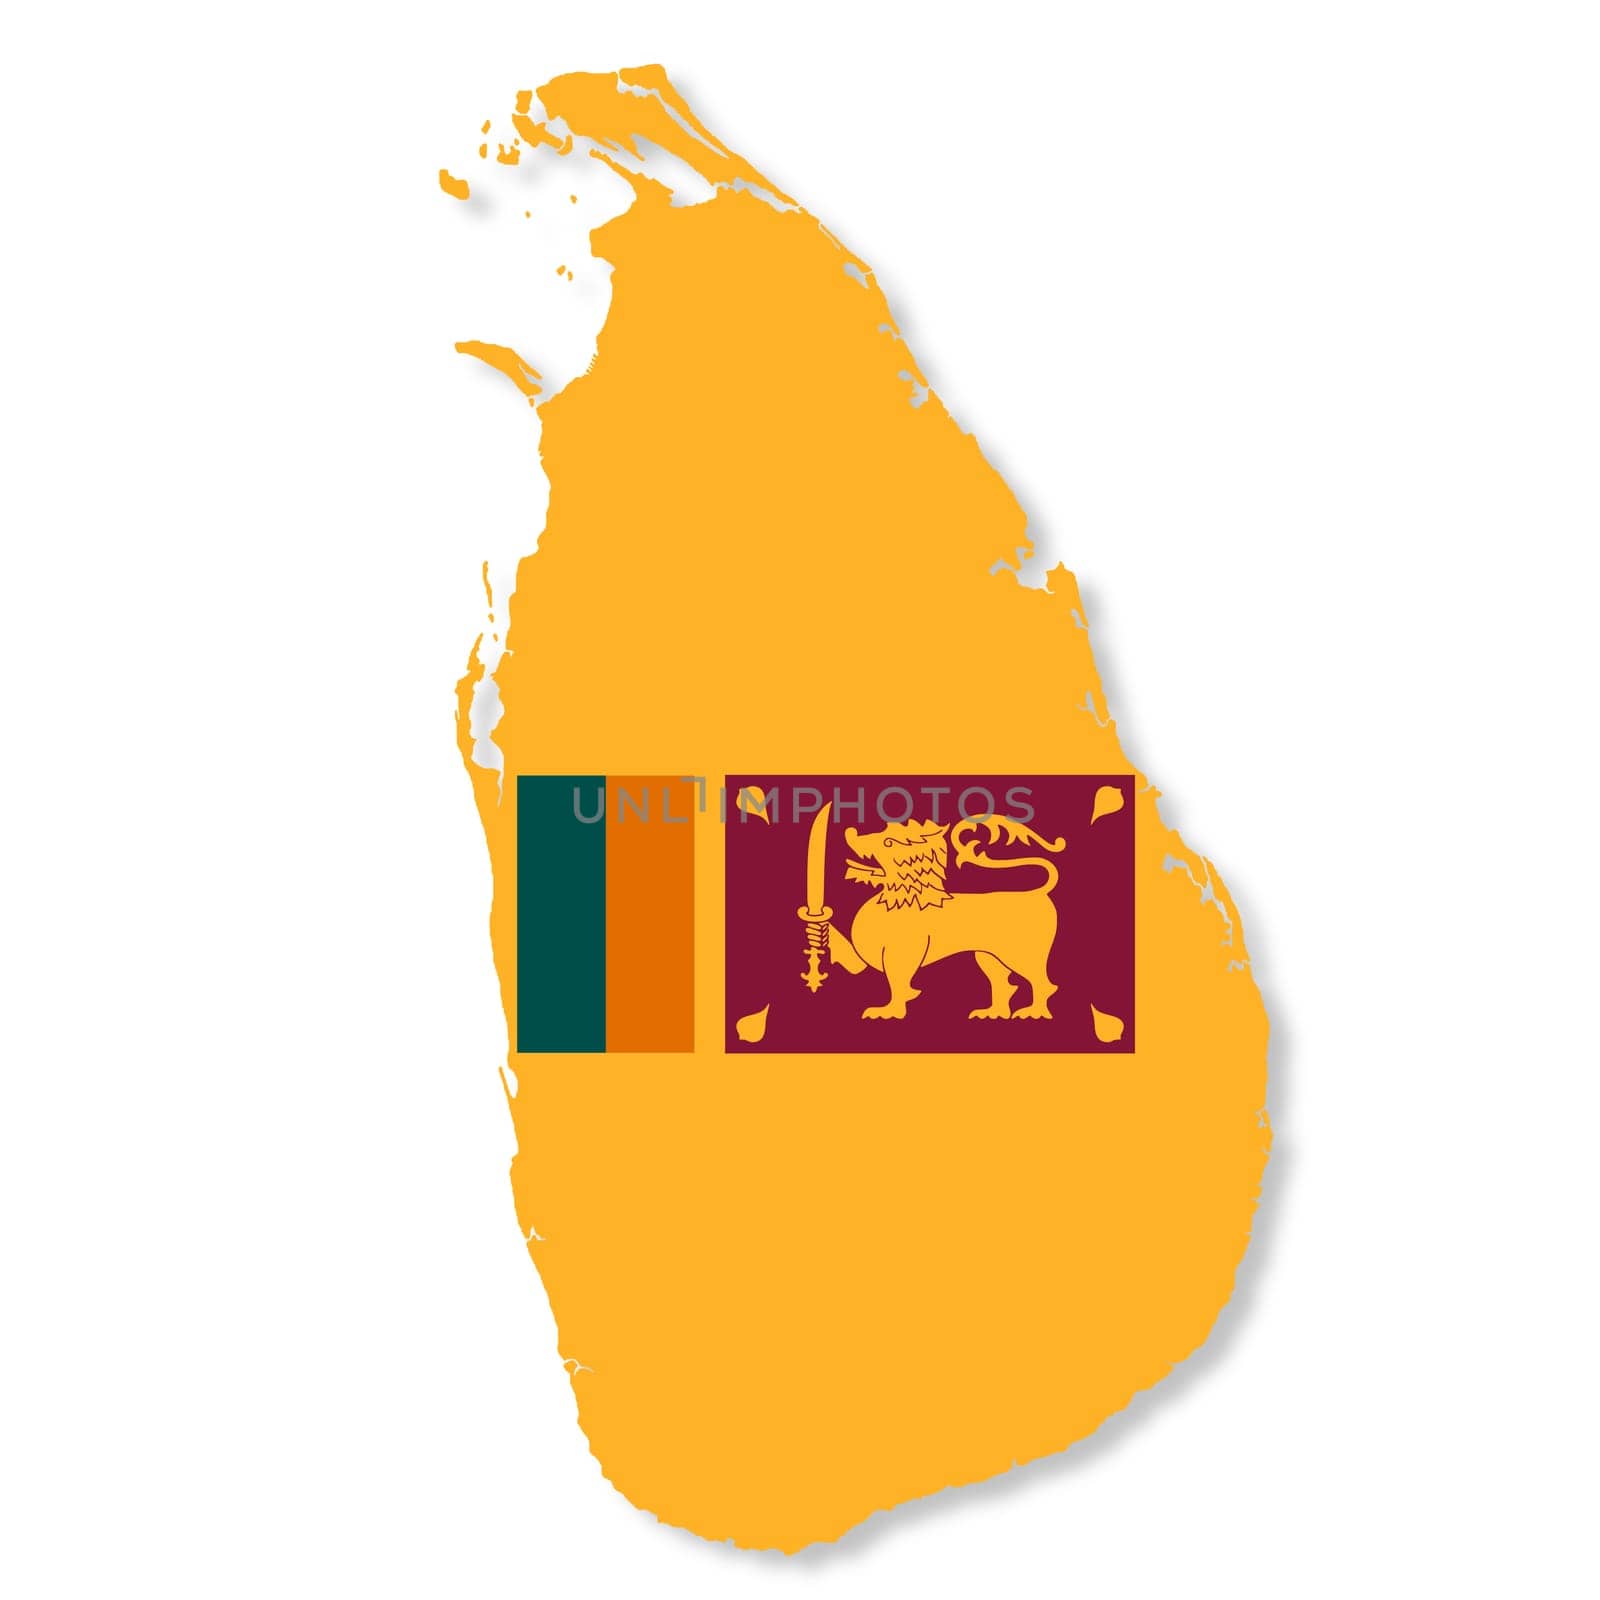 A Sri Lanka flag map on white background with clipping path